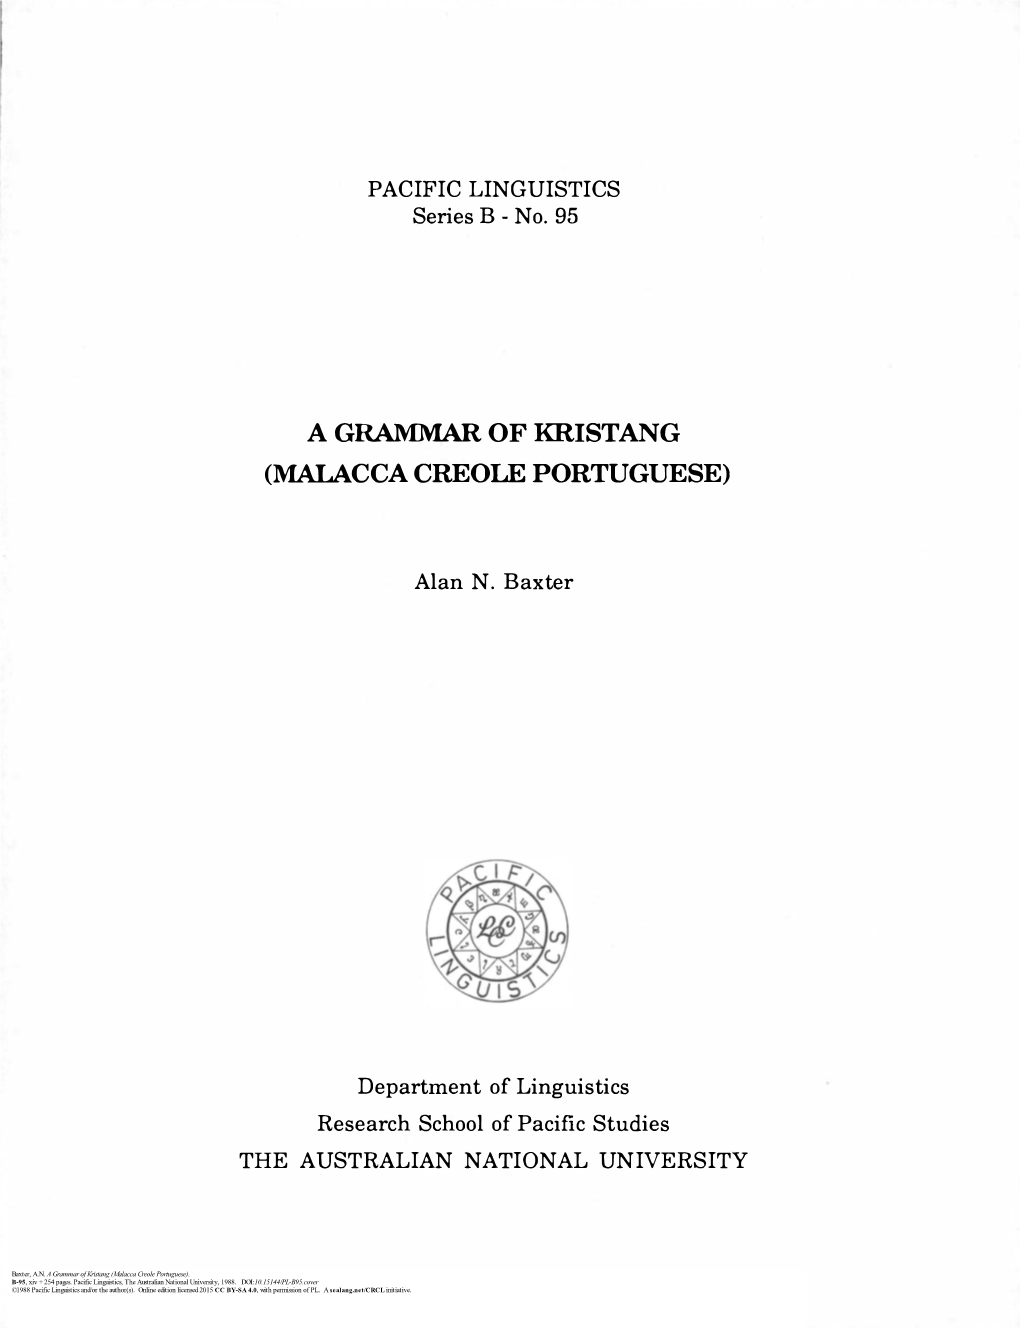 A Grammar of Kristang (Malacca Creole Portuguese)